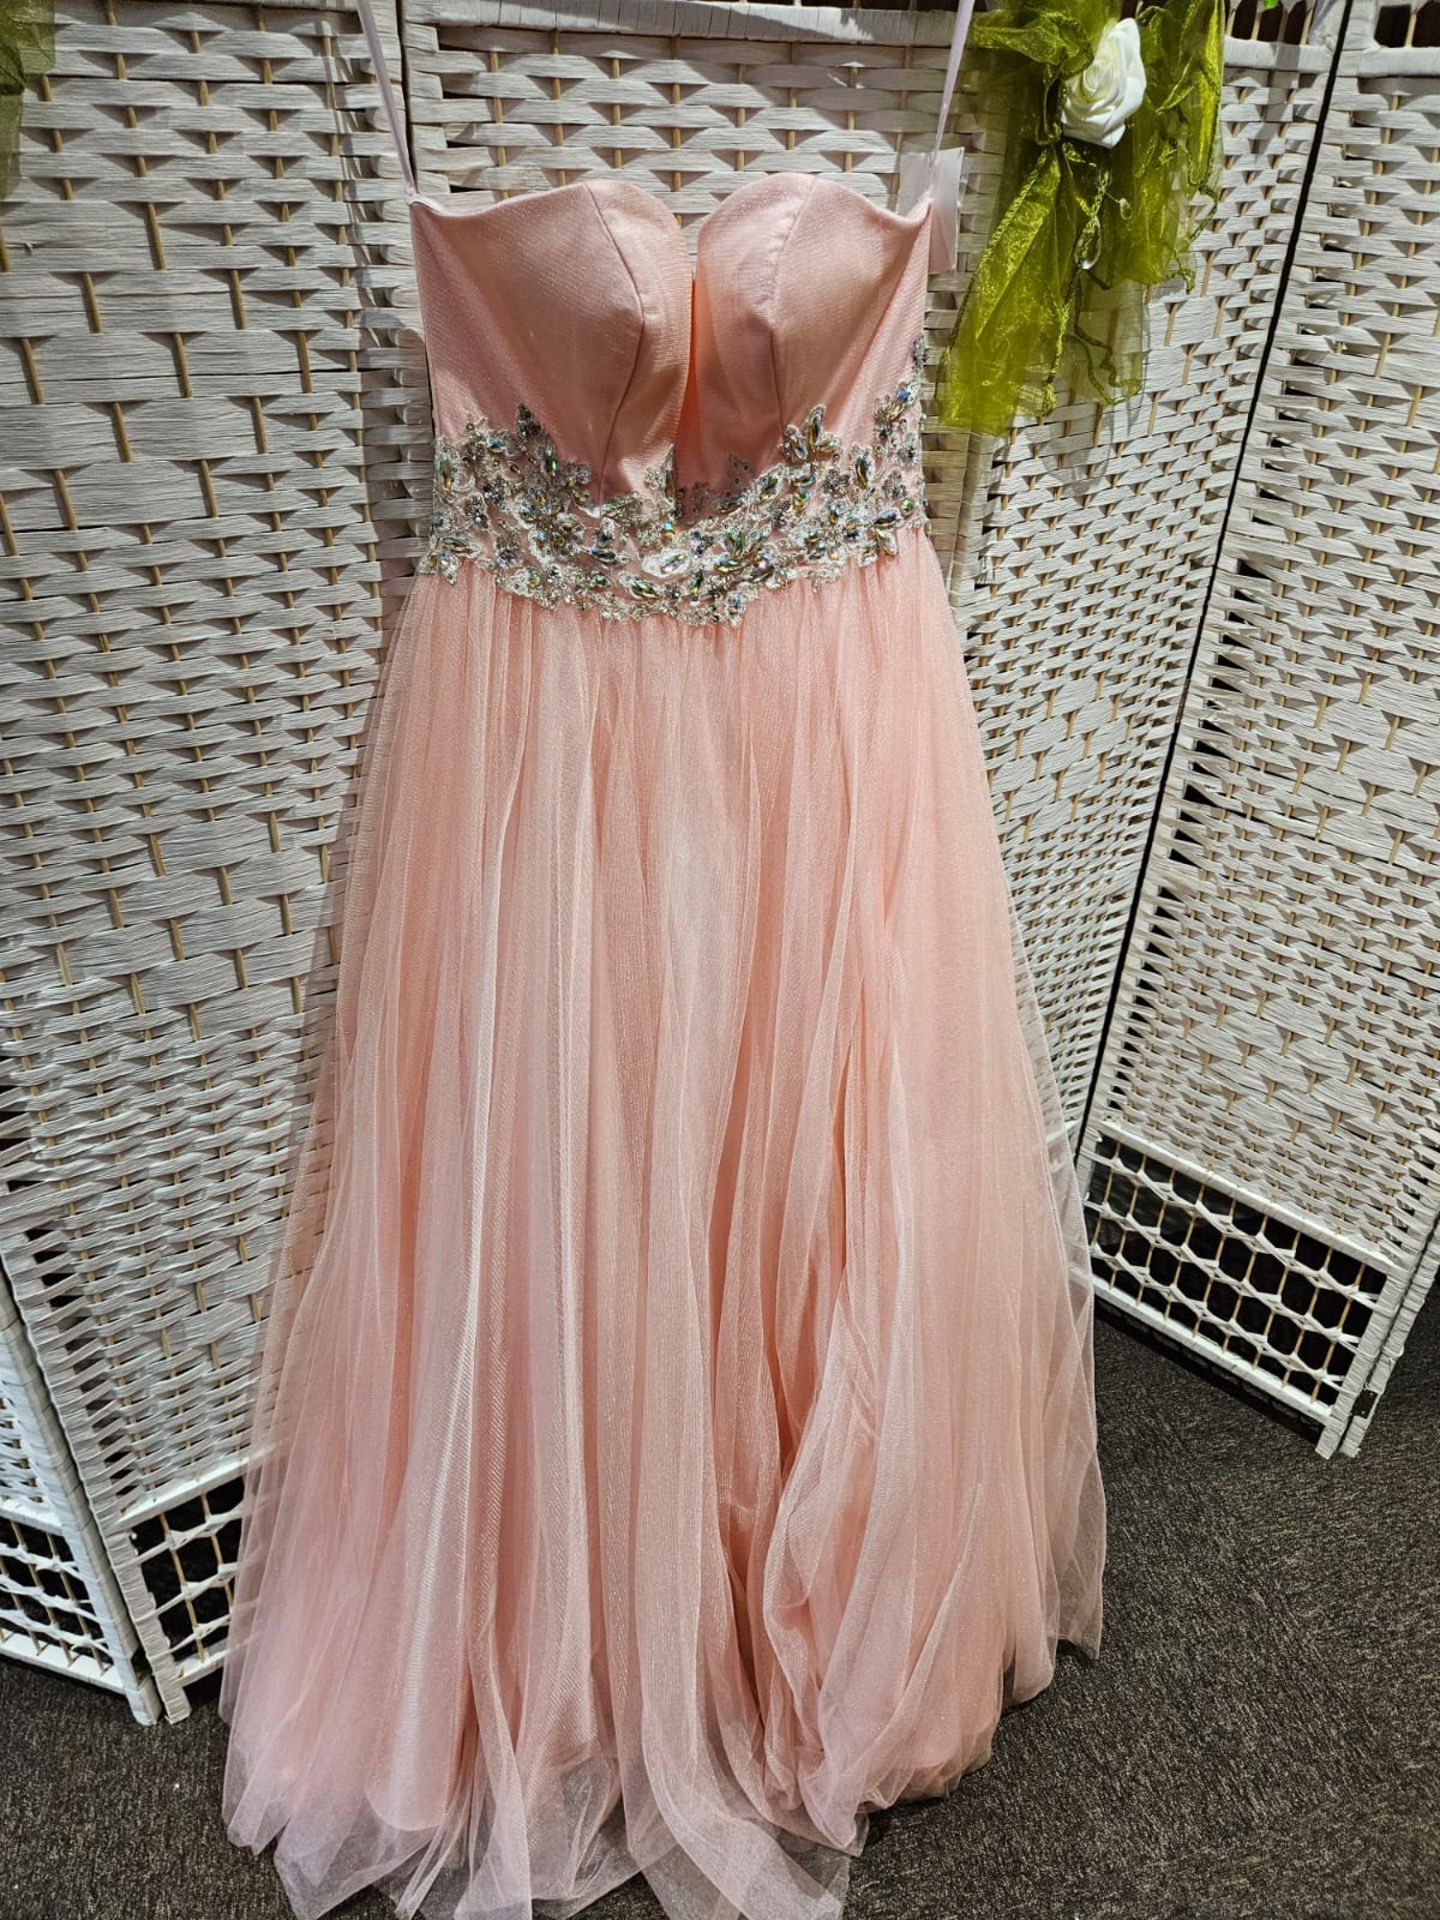 Prom Dress Crystal Breeze Peach Size 6 - Image 2 of 5